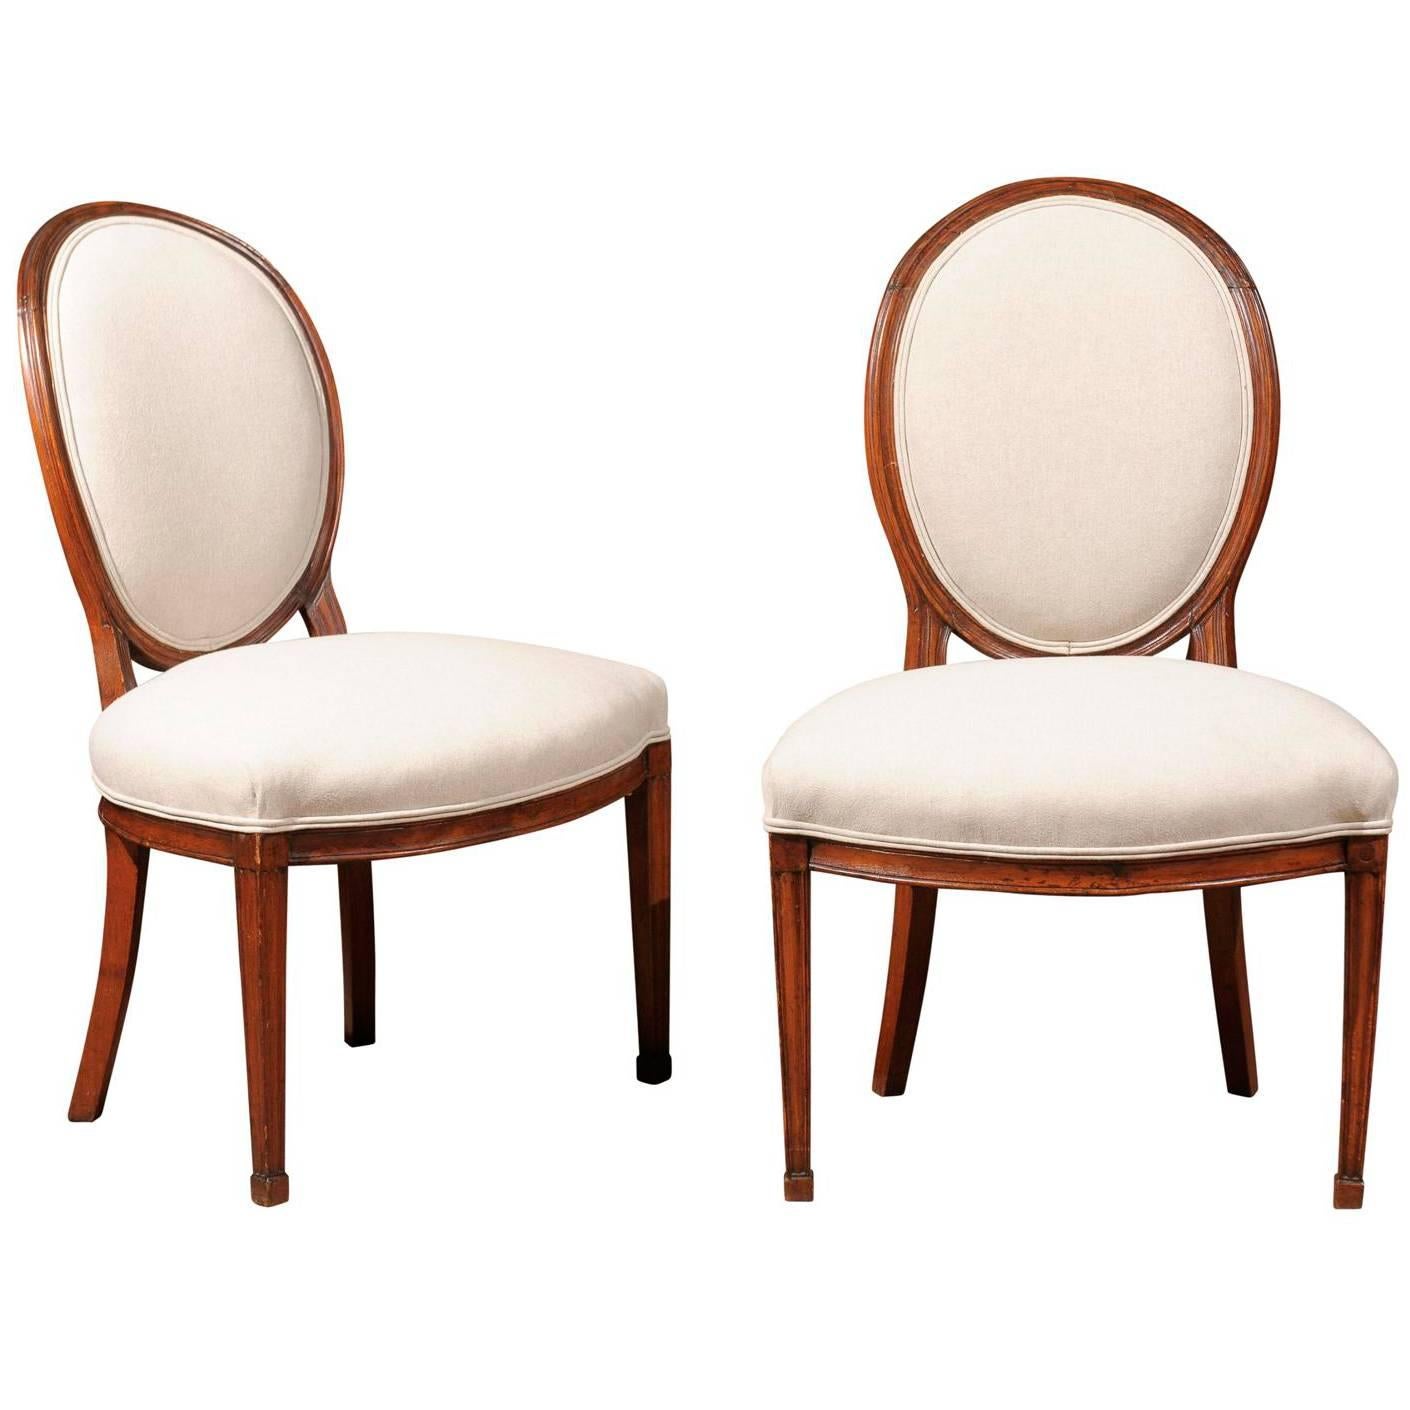 Pair of Louis XVI Period Balloon Back Side Chairs in Beechwood France circa 1780